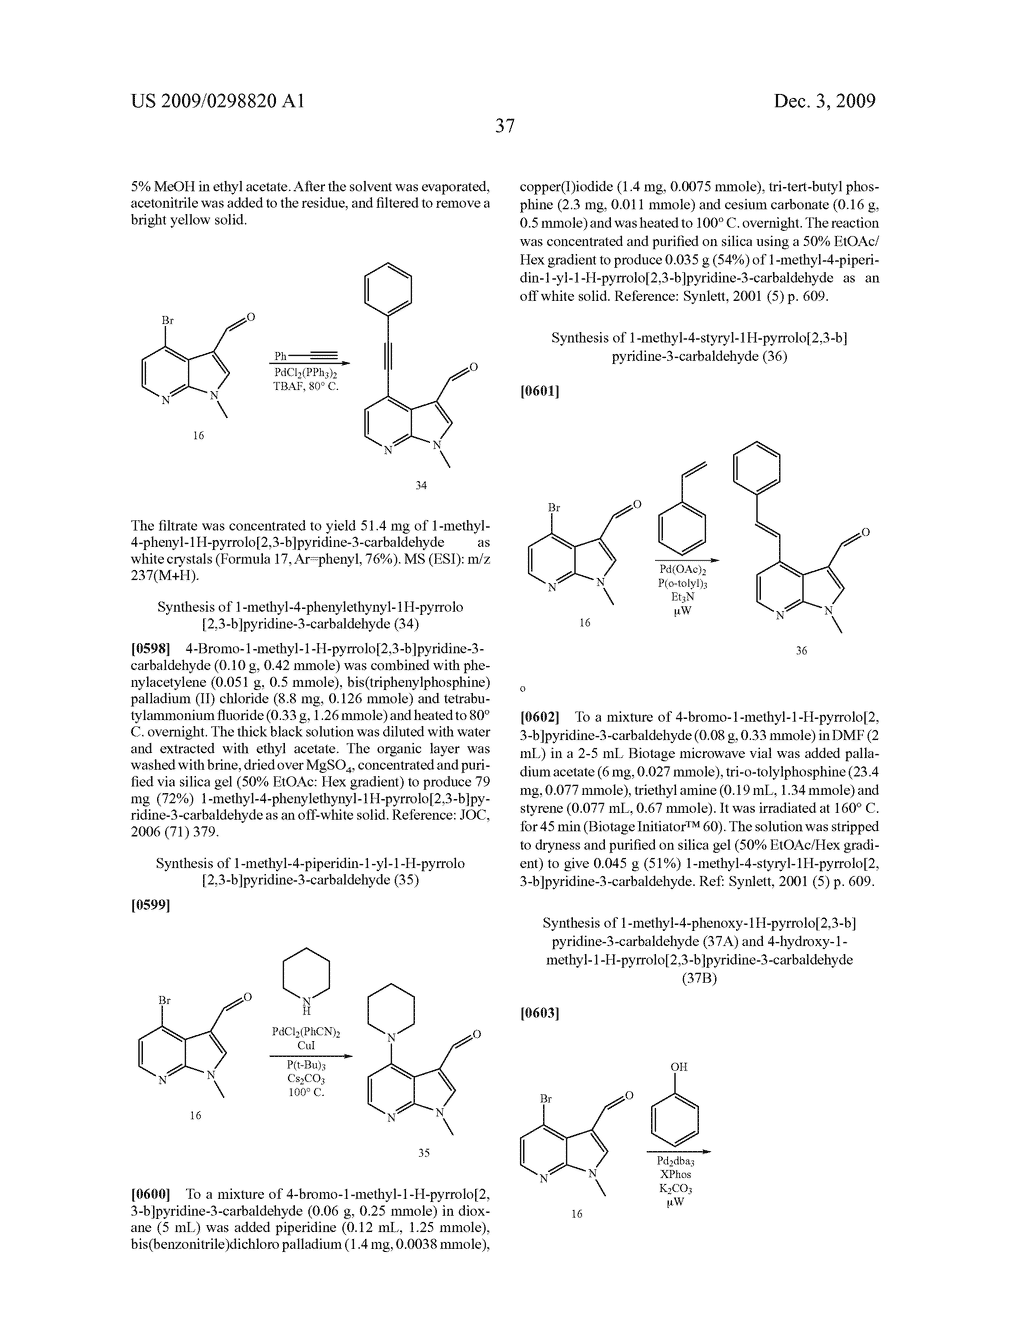 3-SUBSTITUTED-1H-PYRROLO[2,3-B]PYRIDINE AND 3-SUBSTITUTED-1H-PYRROLO[3,2-B]PYRIDINE COMPOUNDS, THEIR USE AS MTOR KINASE AND PI3 KINASE INHIBITORS, AND THEIR SYNTHESES - diagram, schematic, and image 38